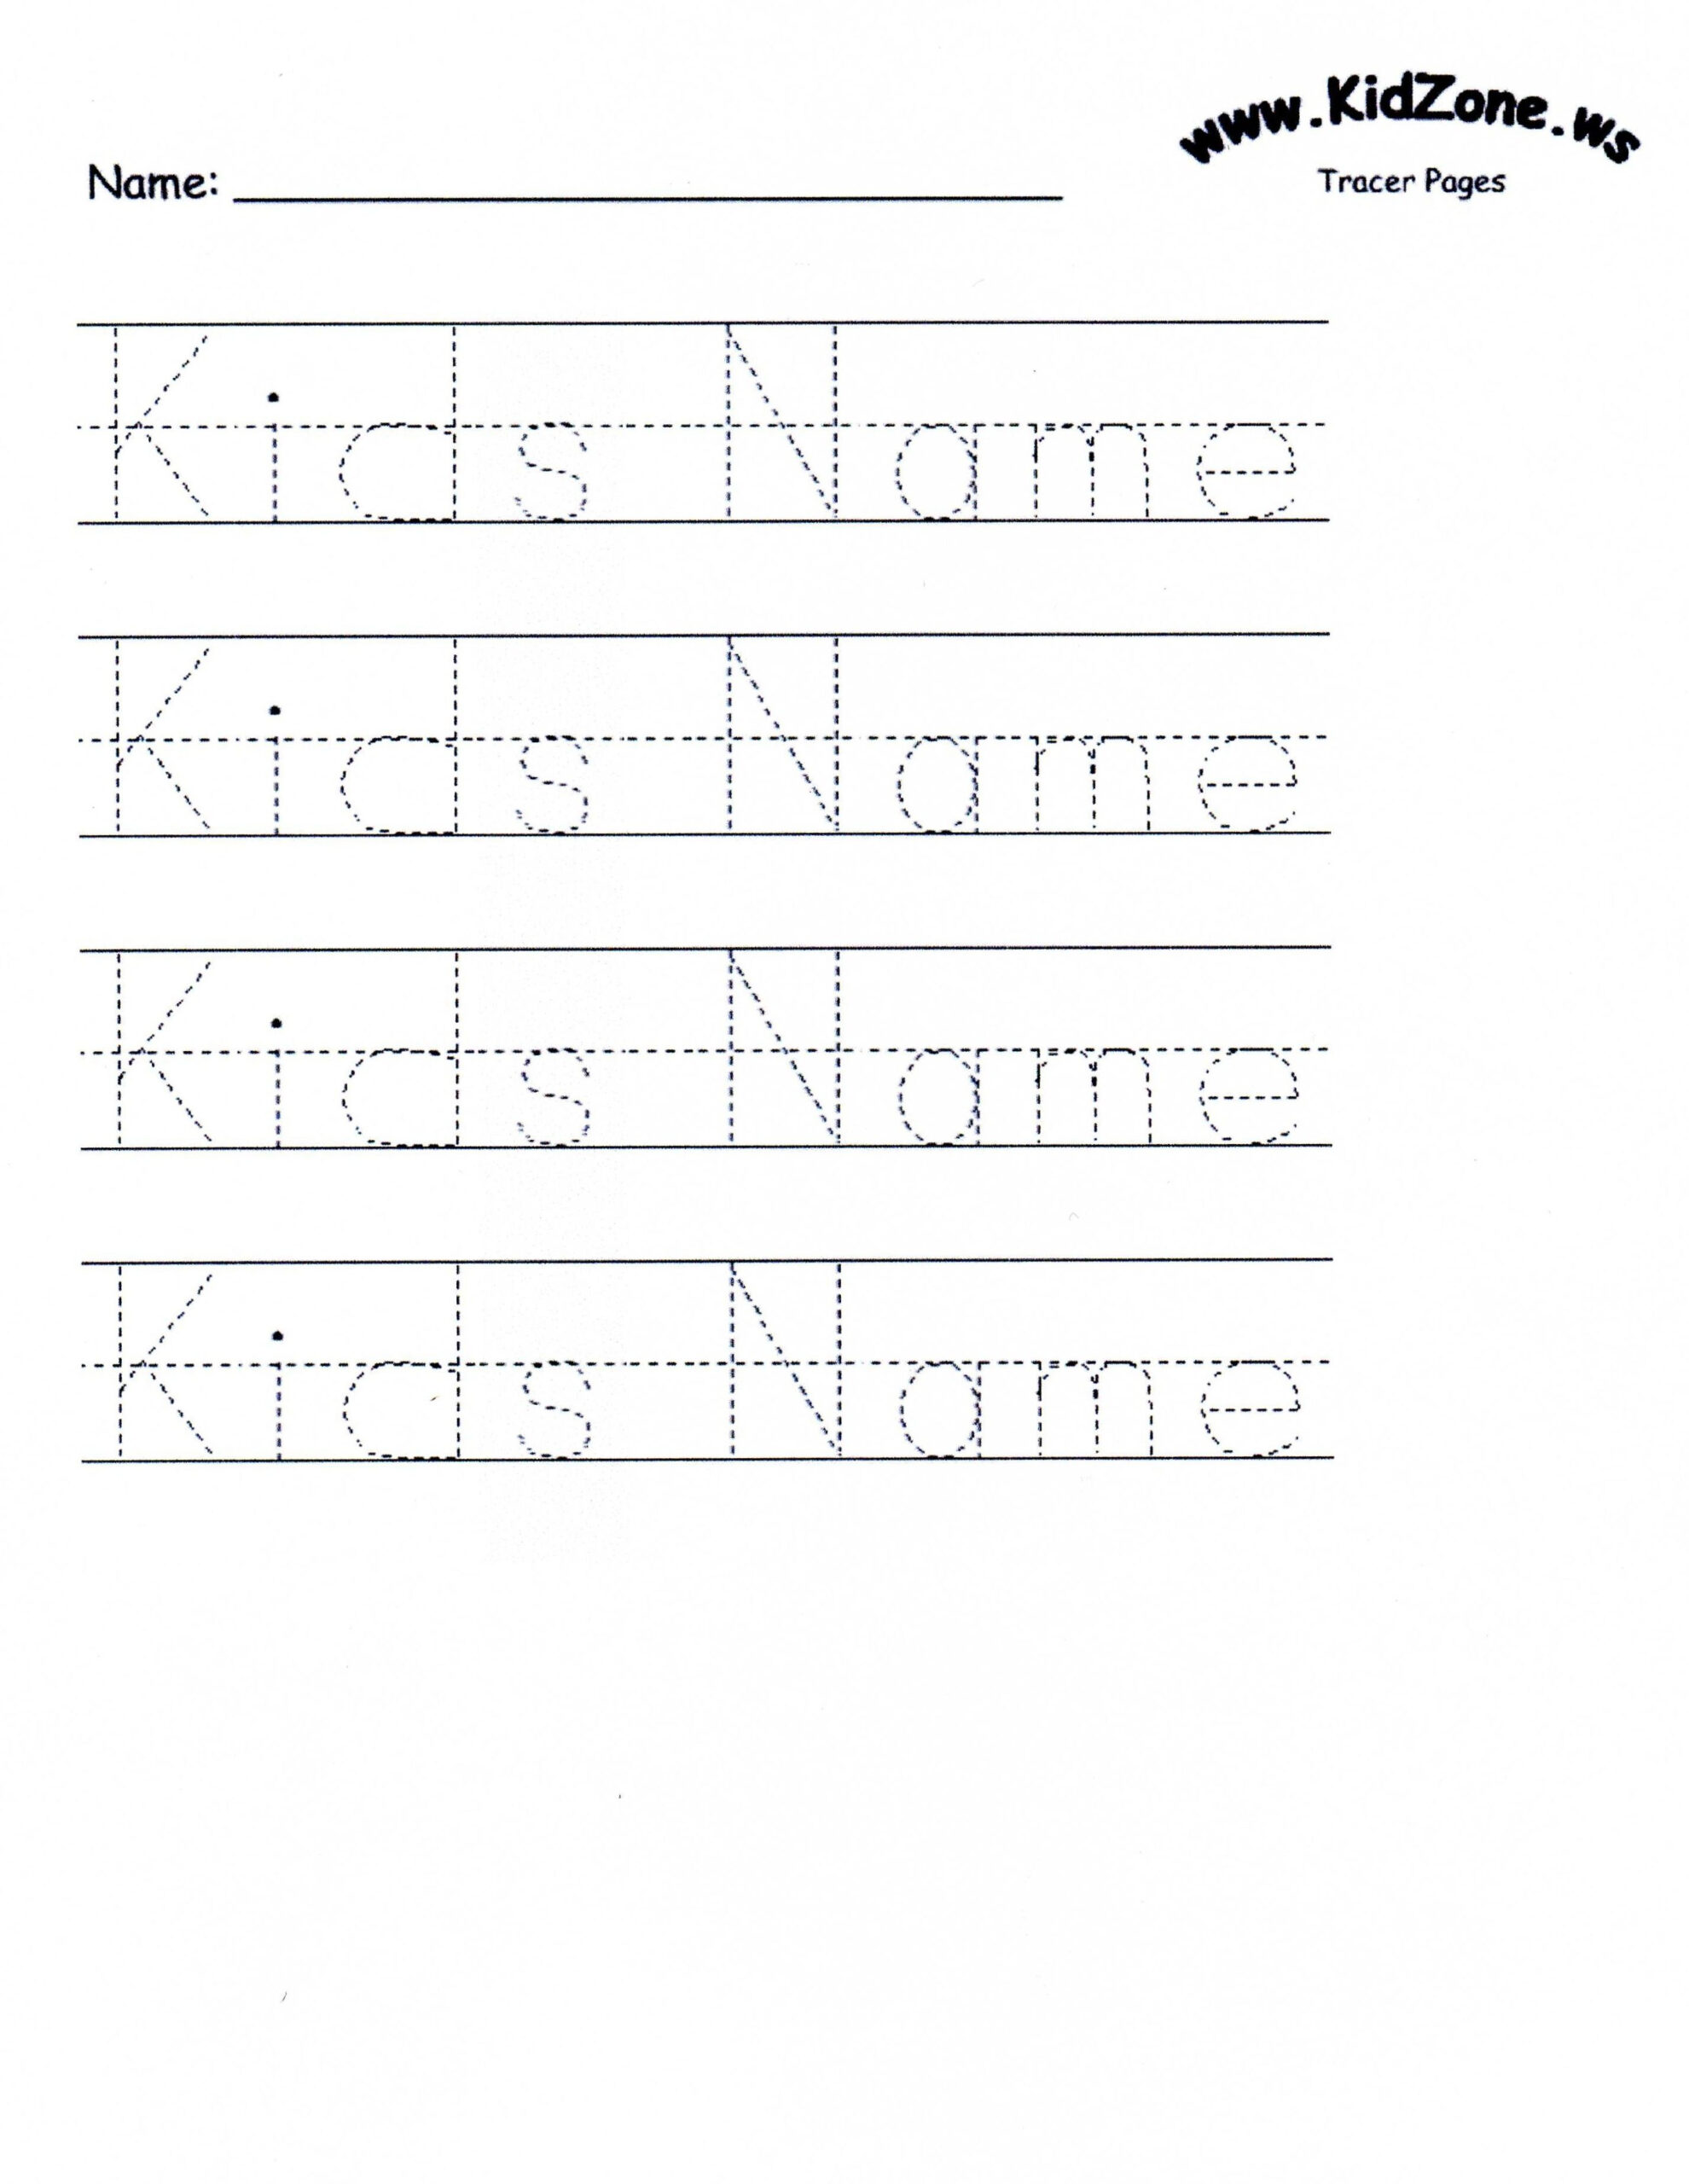 Customizable Printable Letter Pages | Name Tracing inside Name Tracing Maker